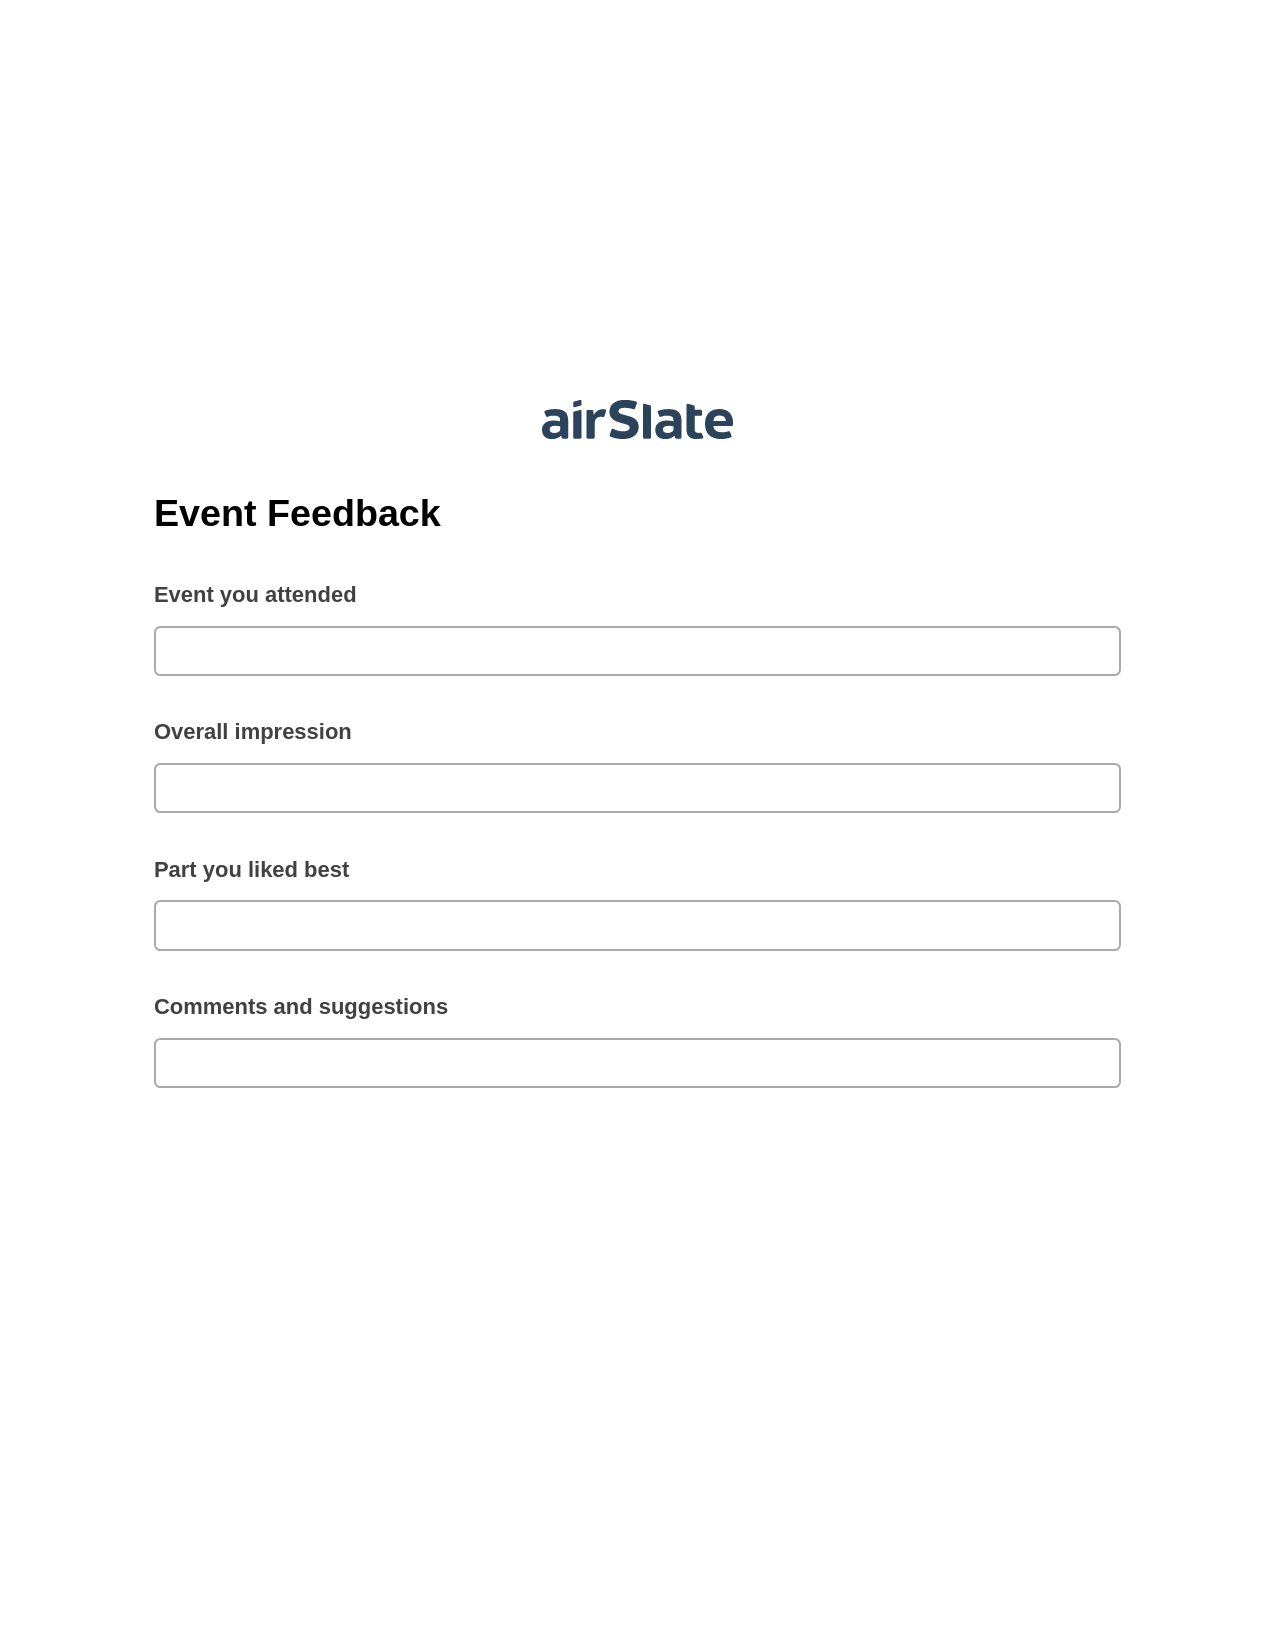 Event Feedback Pre-fill from another Slate Bot, Create Slate Reminder Bot, OneDrive Bot